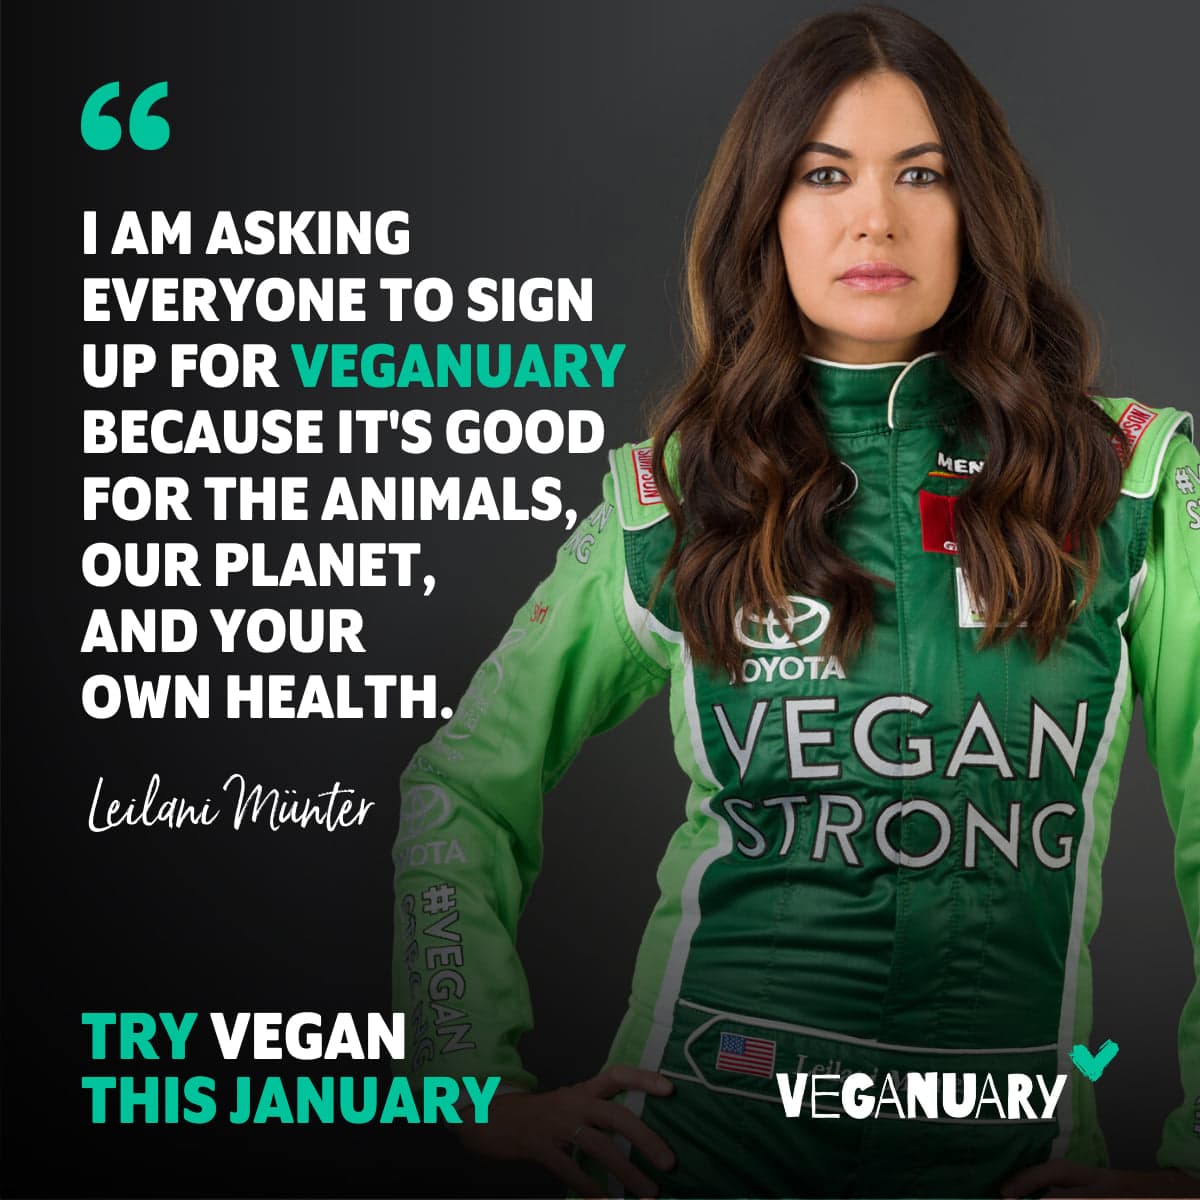 Advert from Veganuary with Woman wearing a top saying Vegan Strong